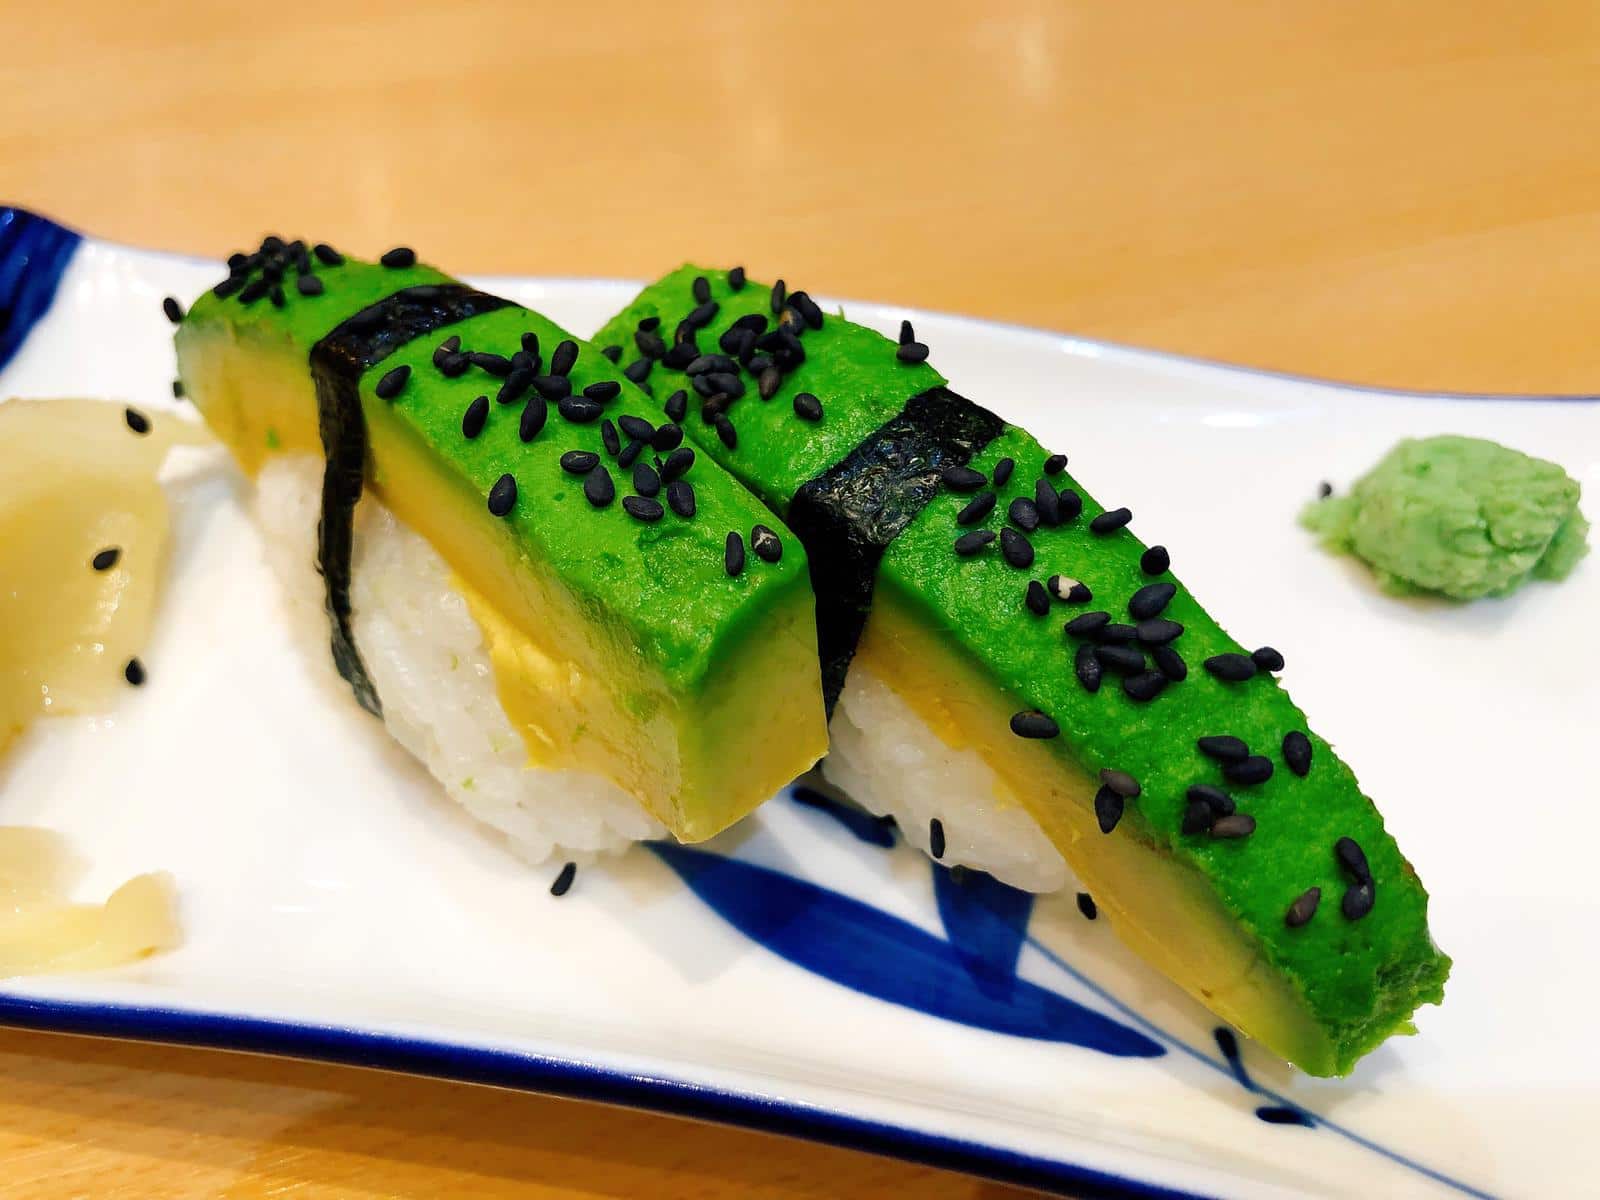 Two pieces of Avocado Nigiri with wasabi and ginger arranged on a blue and white plate. Part of the Tenkaichi Vegan Sushi range